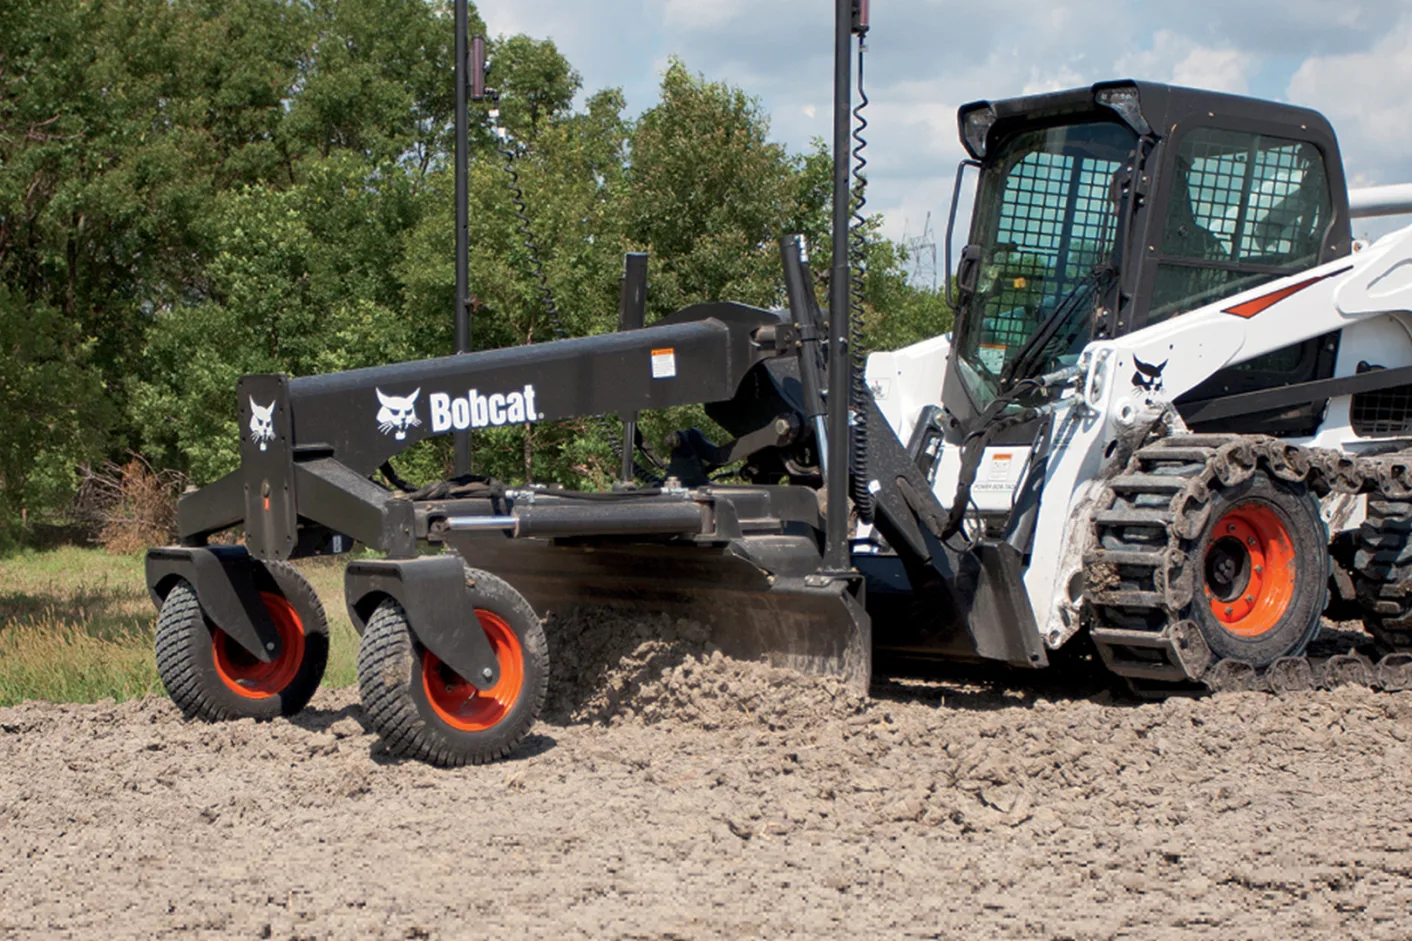 Browse Specs and more for the S750 Skid-Steer Loader - Bobcat of the Rockies